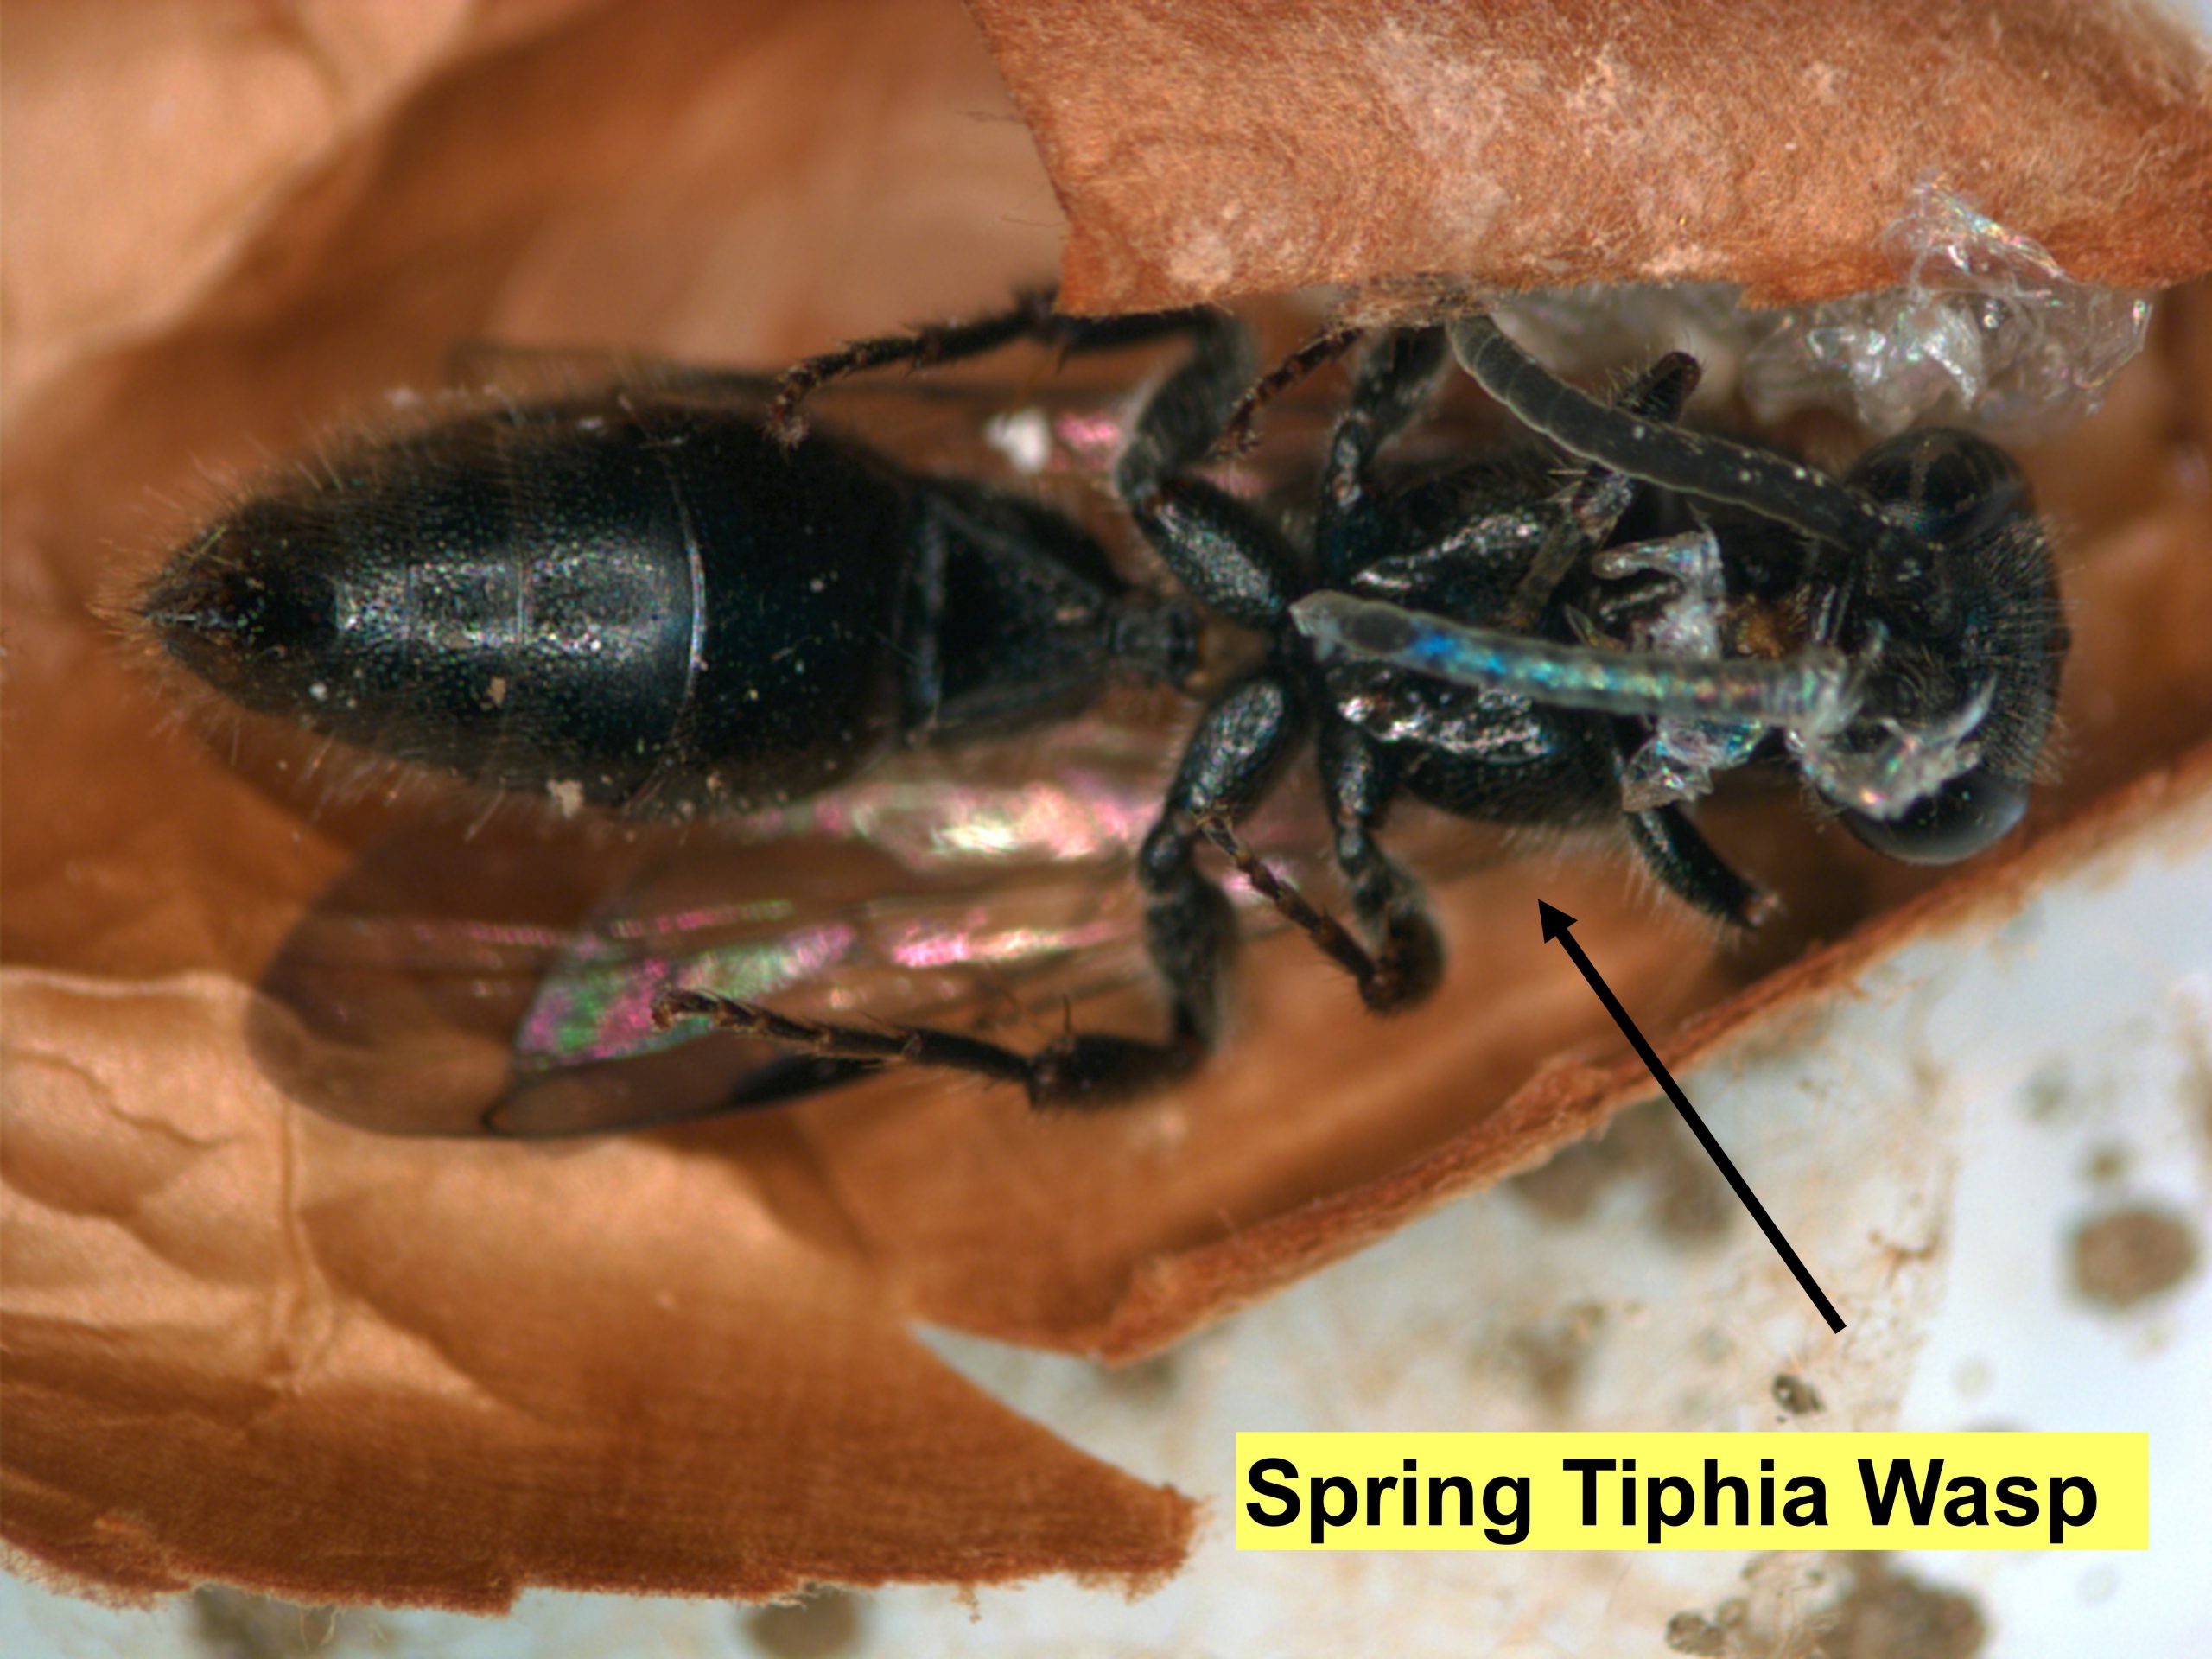 Spring Tiphia adult with label